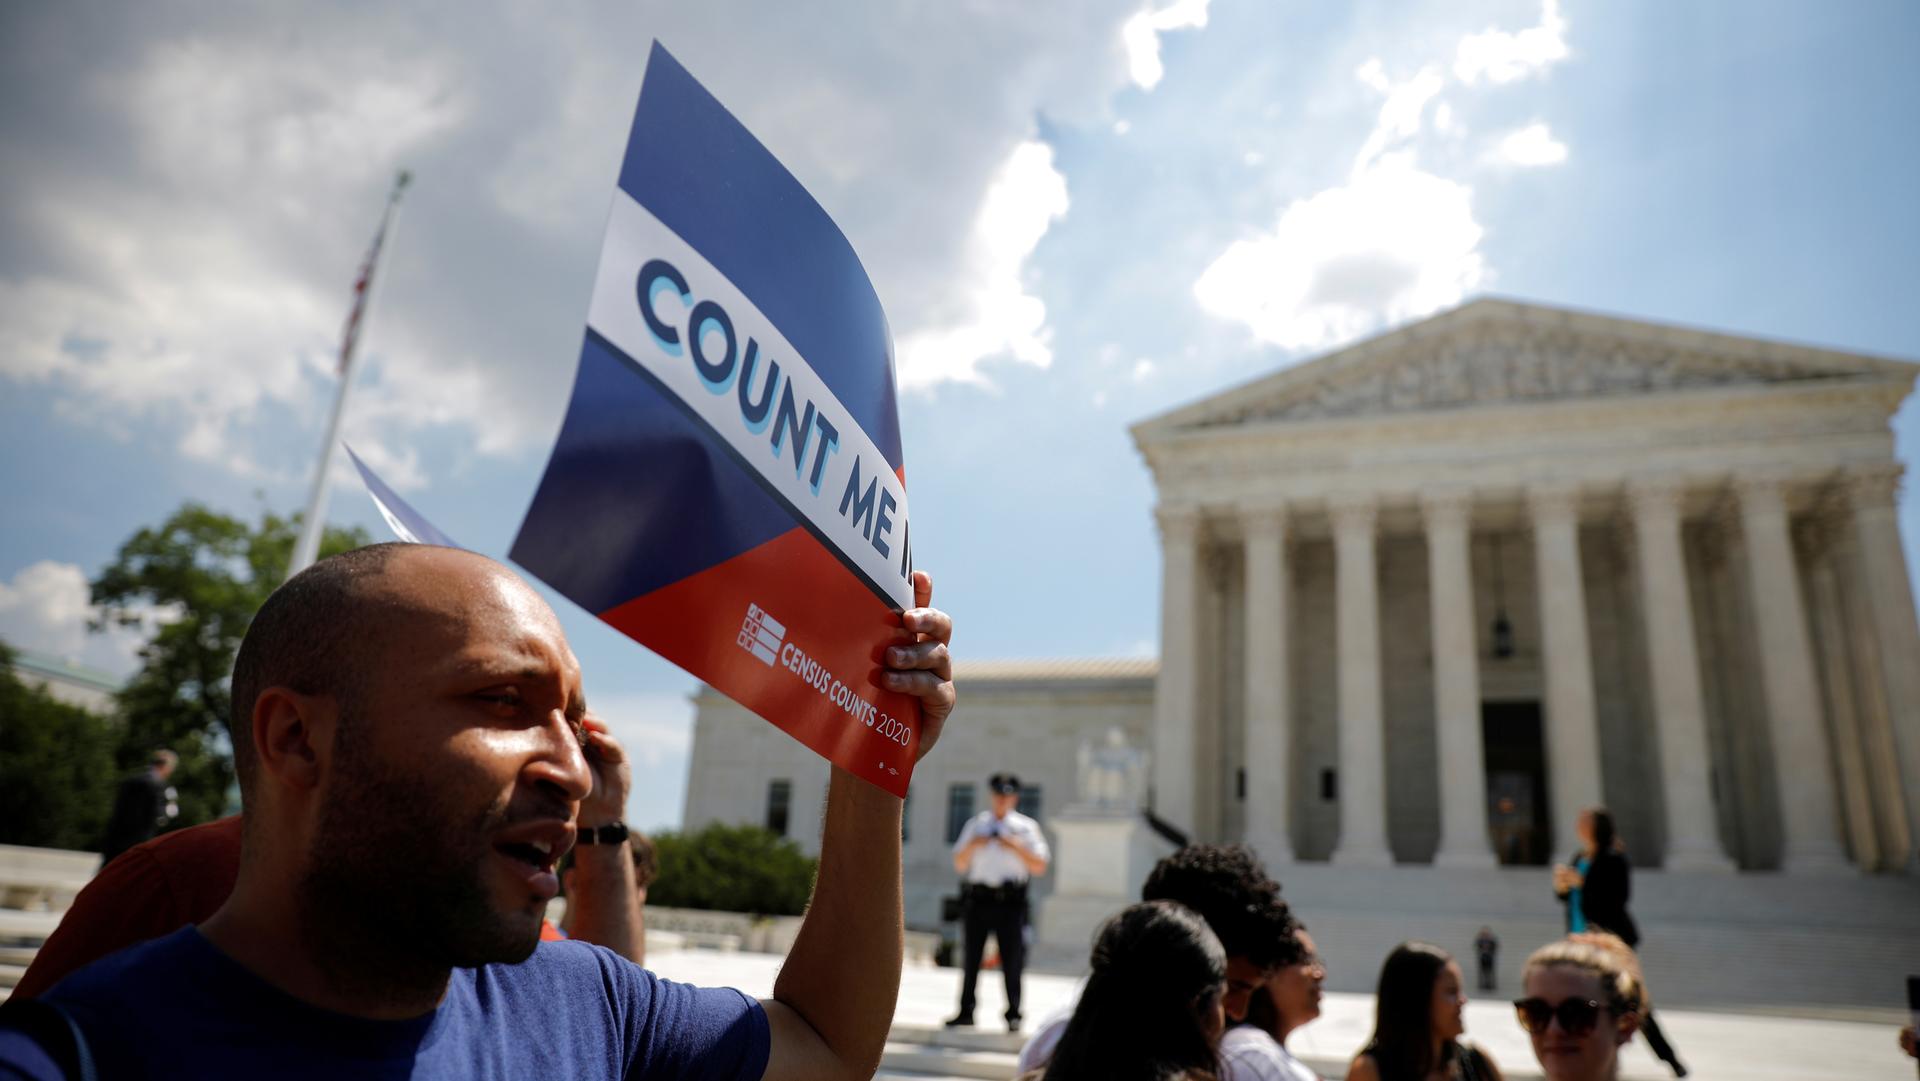 A man stands in front of the US Supreme Court building holding a sign that says "Count me"